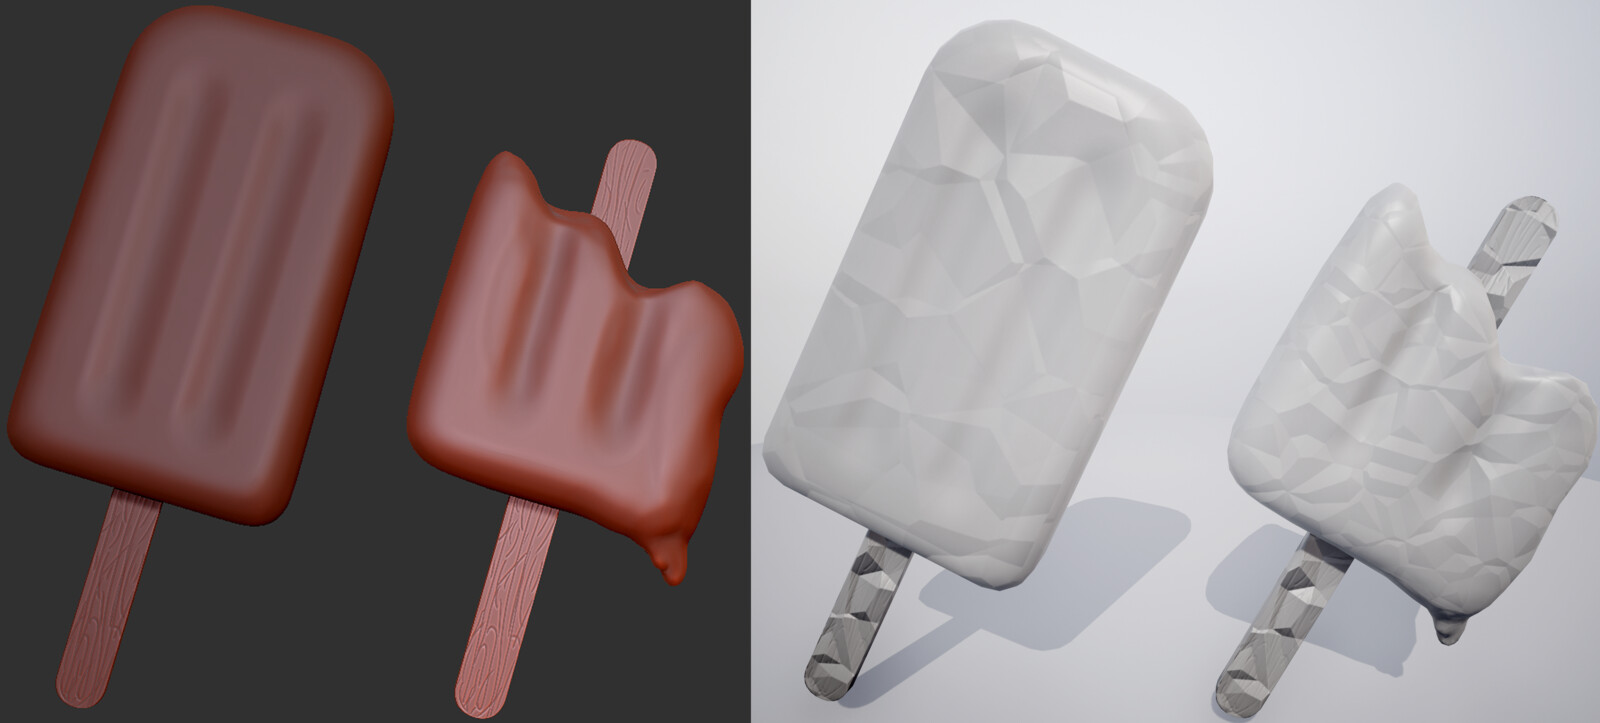 Popsicle stick and indents added in sculpt in Zbrushcore, melted popsicle is an altered version of the original whole popsicle with additional sculpting.